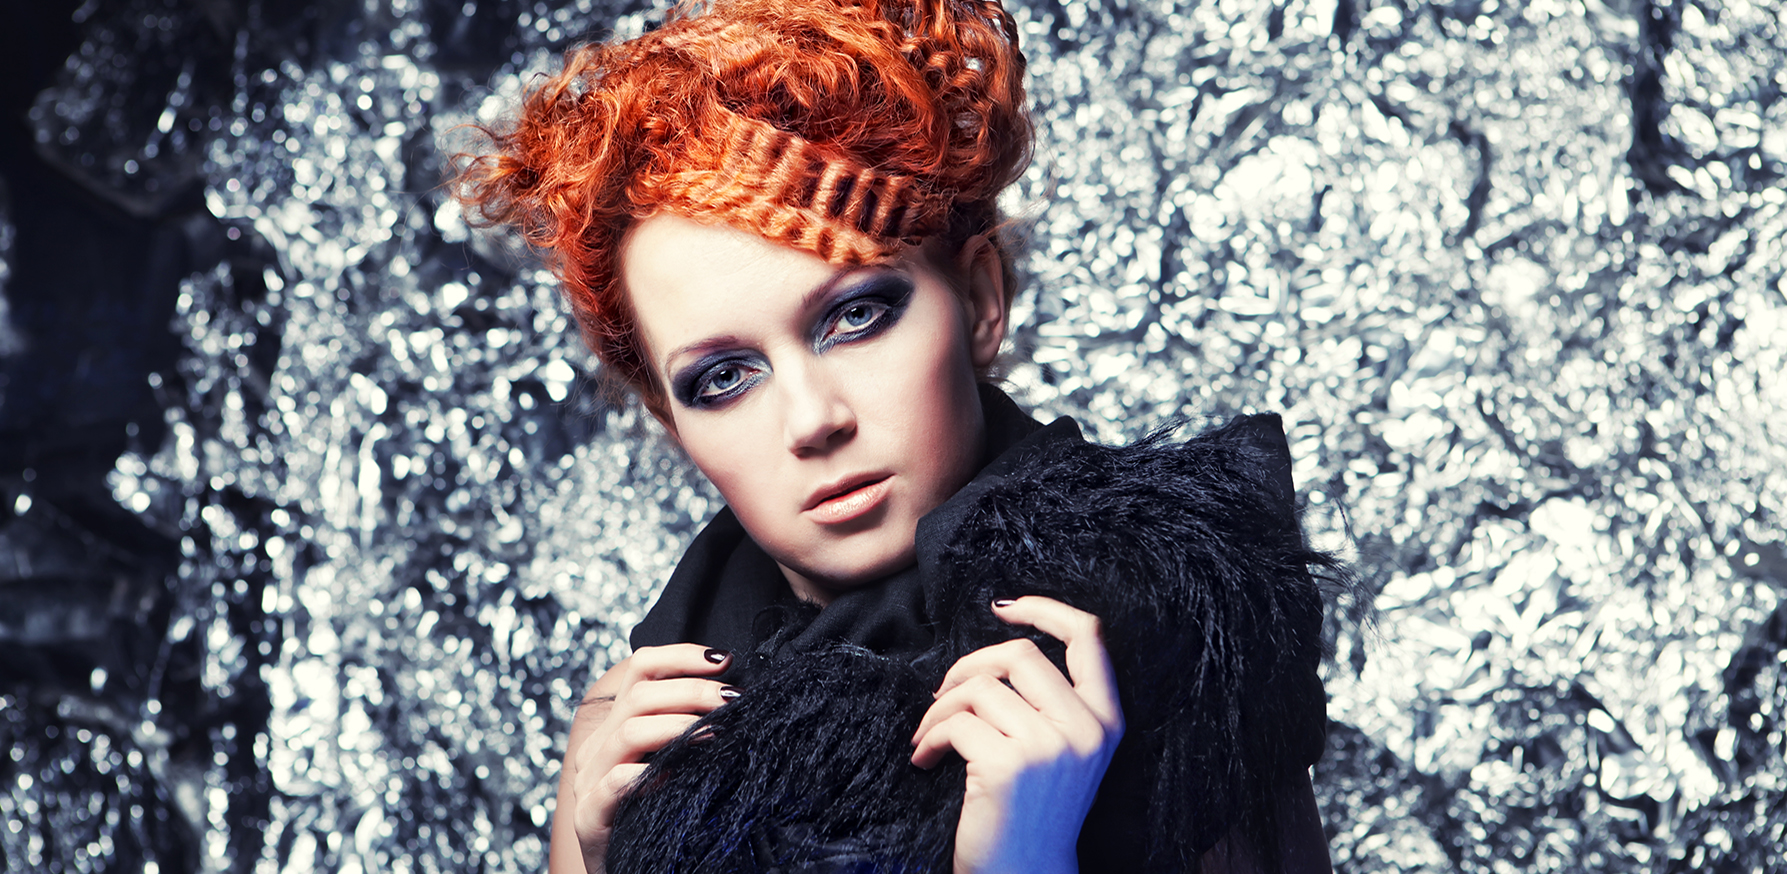 maximalist-makeup-bold-makeup-woman-with-red-hair-in-bold-goth-black-makeup